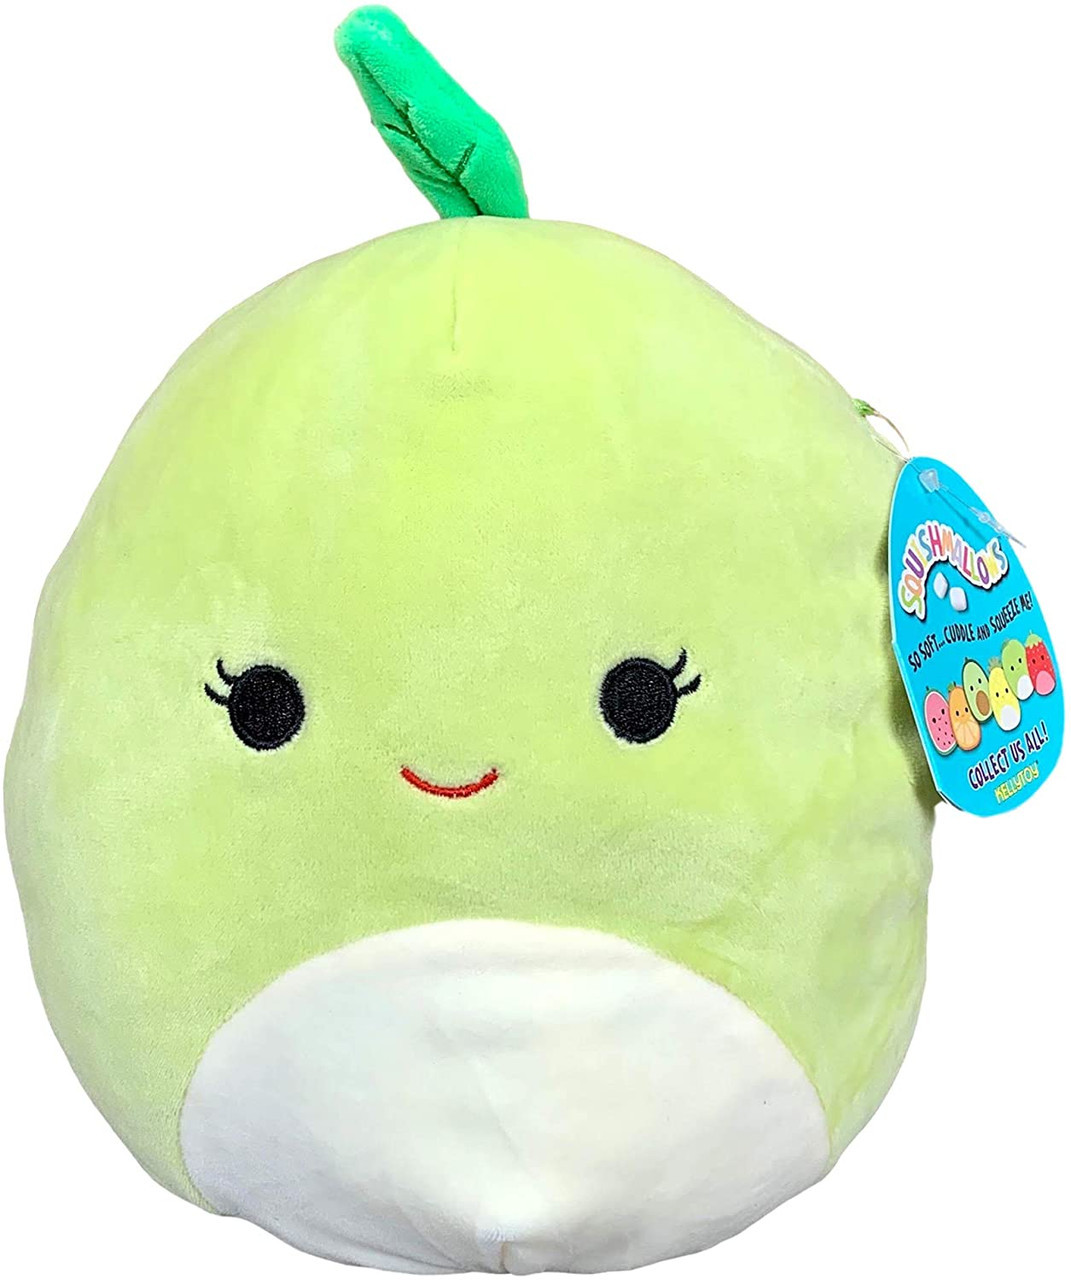 https://cdn11.bigcommerce.com/s-mhr53lwccw/images/stencil/1280x1280/products/1235/8451/squishmallows-ashley-apple-squishy-soft-plush-toy-8-inch__74649.1663975727.jpg?c=1?imbypass=on